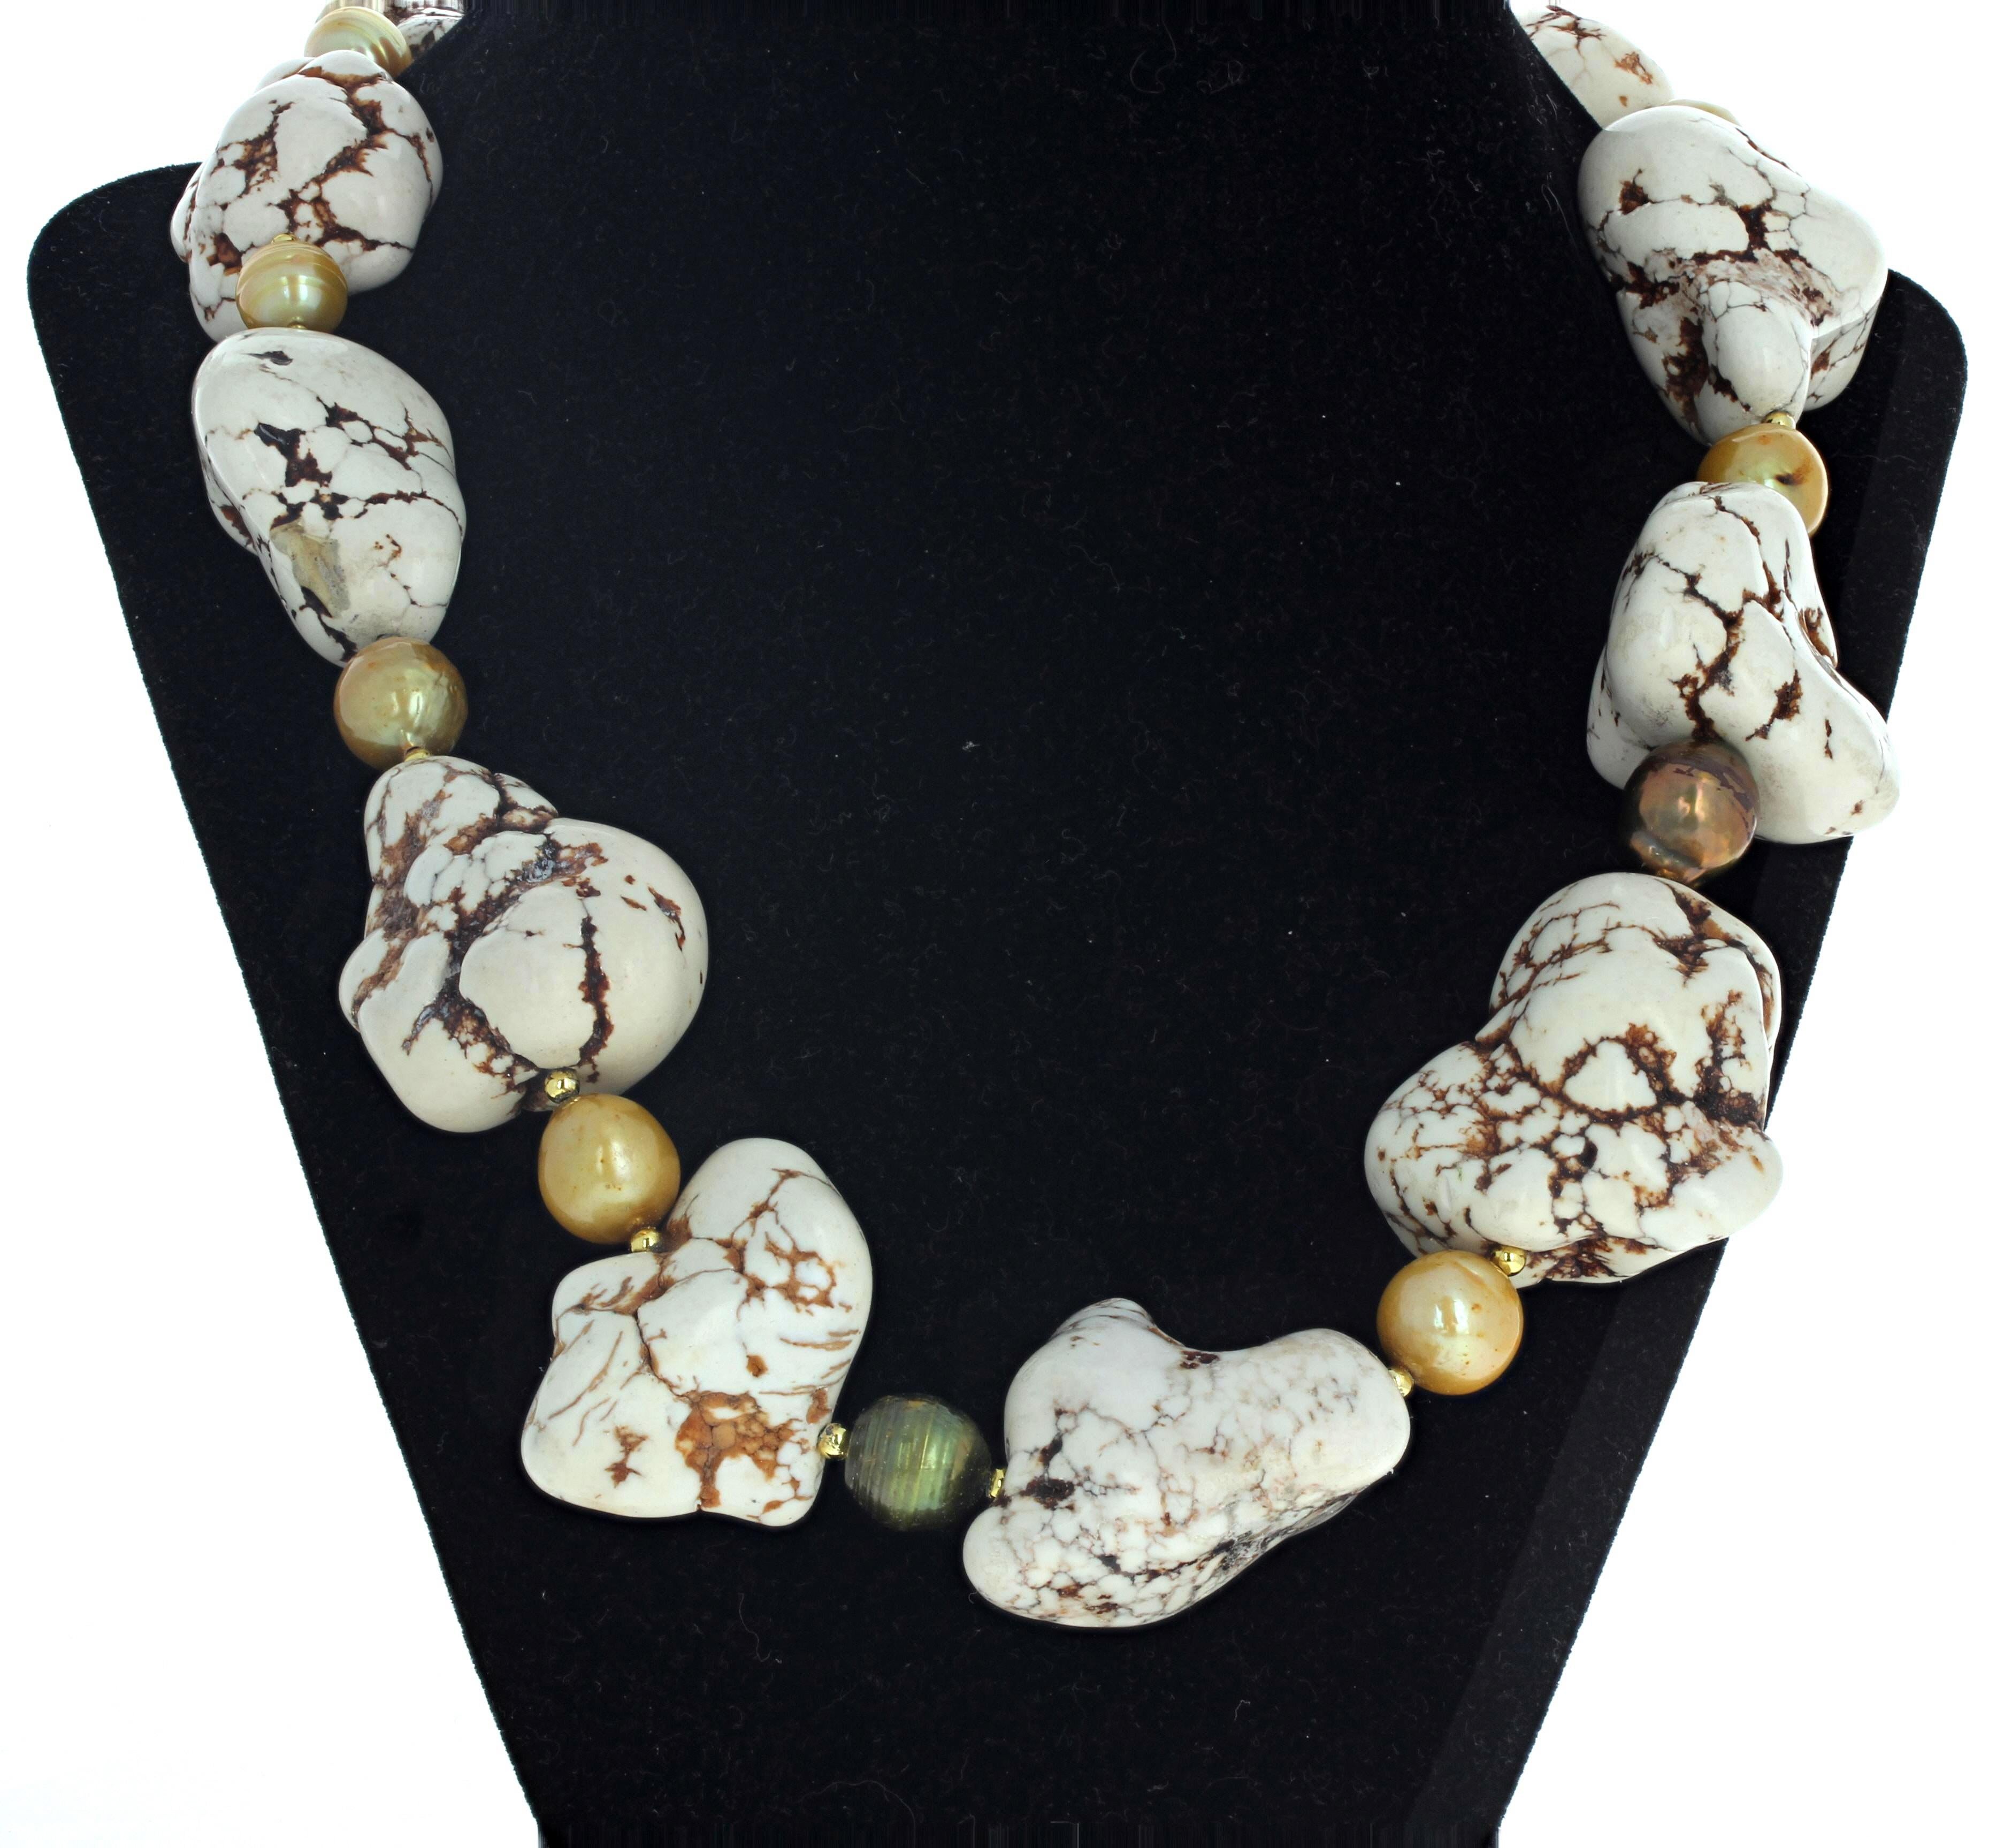 Known as Howlite Crystal Beads - Creamy White Brown Vein Beads - these are polished so they sit comfortably and artistically around your neck in the 21 inch long necklace.  The largest one is approximately 40mm x 35mm.  They are enhanced with lovely